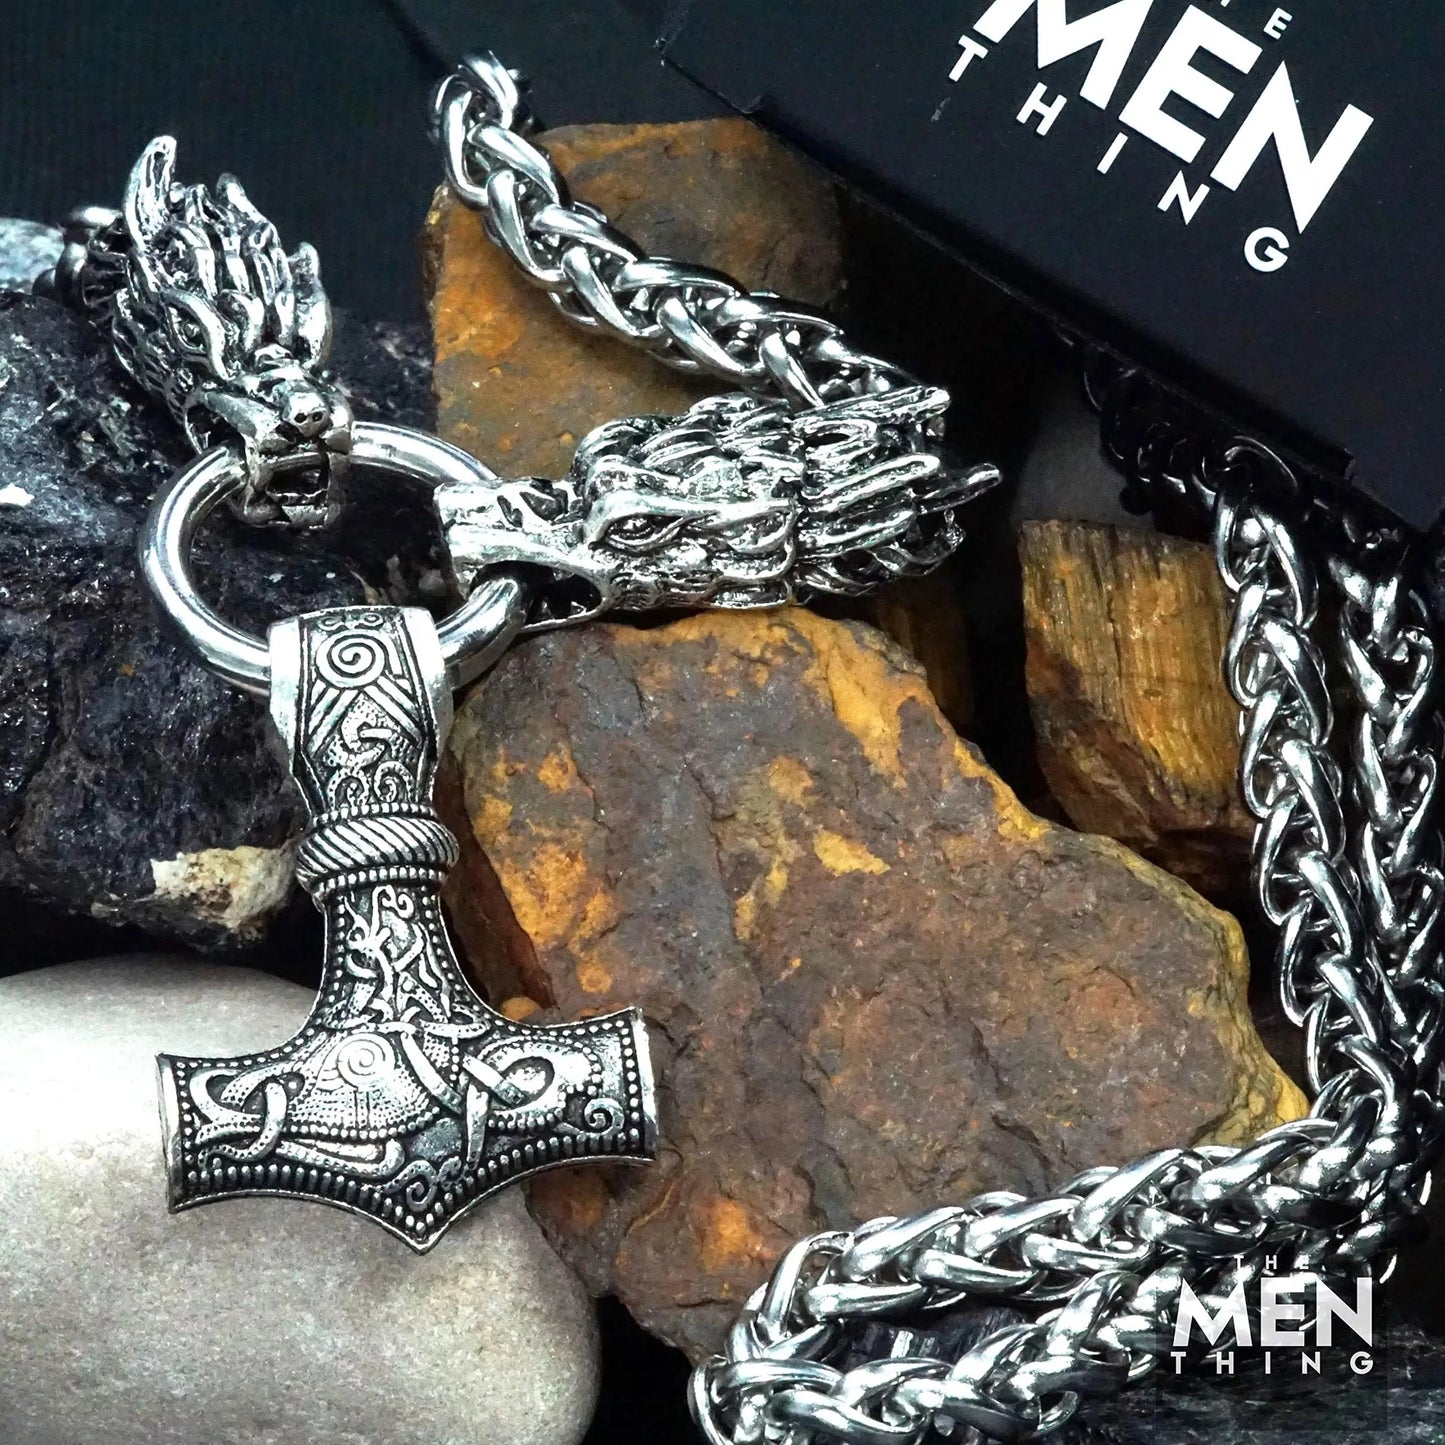 THE MEN THING Norse Viking Thor's Hammer Talisman Necklace, Stainless Steel Nordic Mythology Mjolnir Pendant for Men and Boys